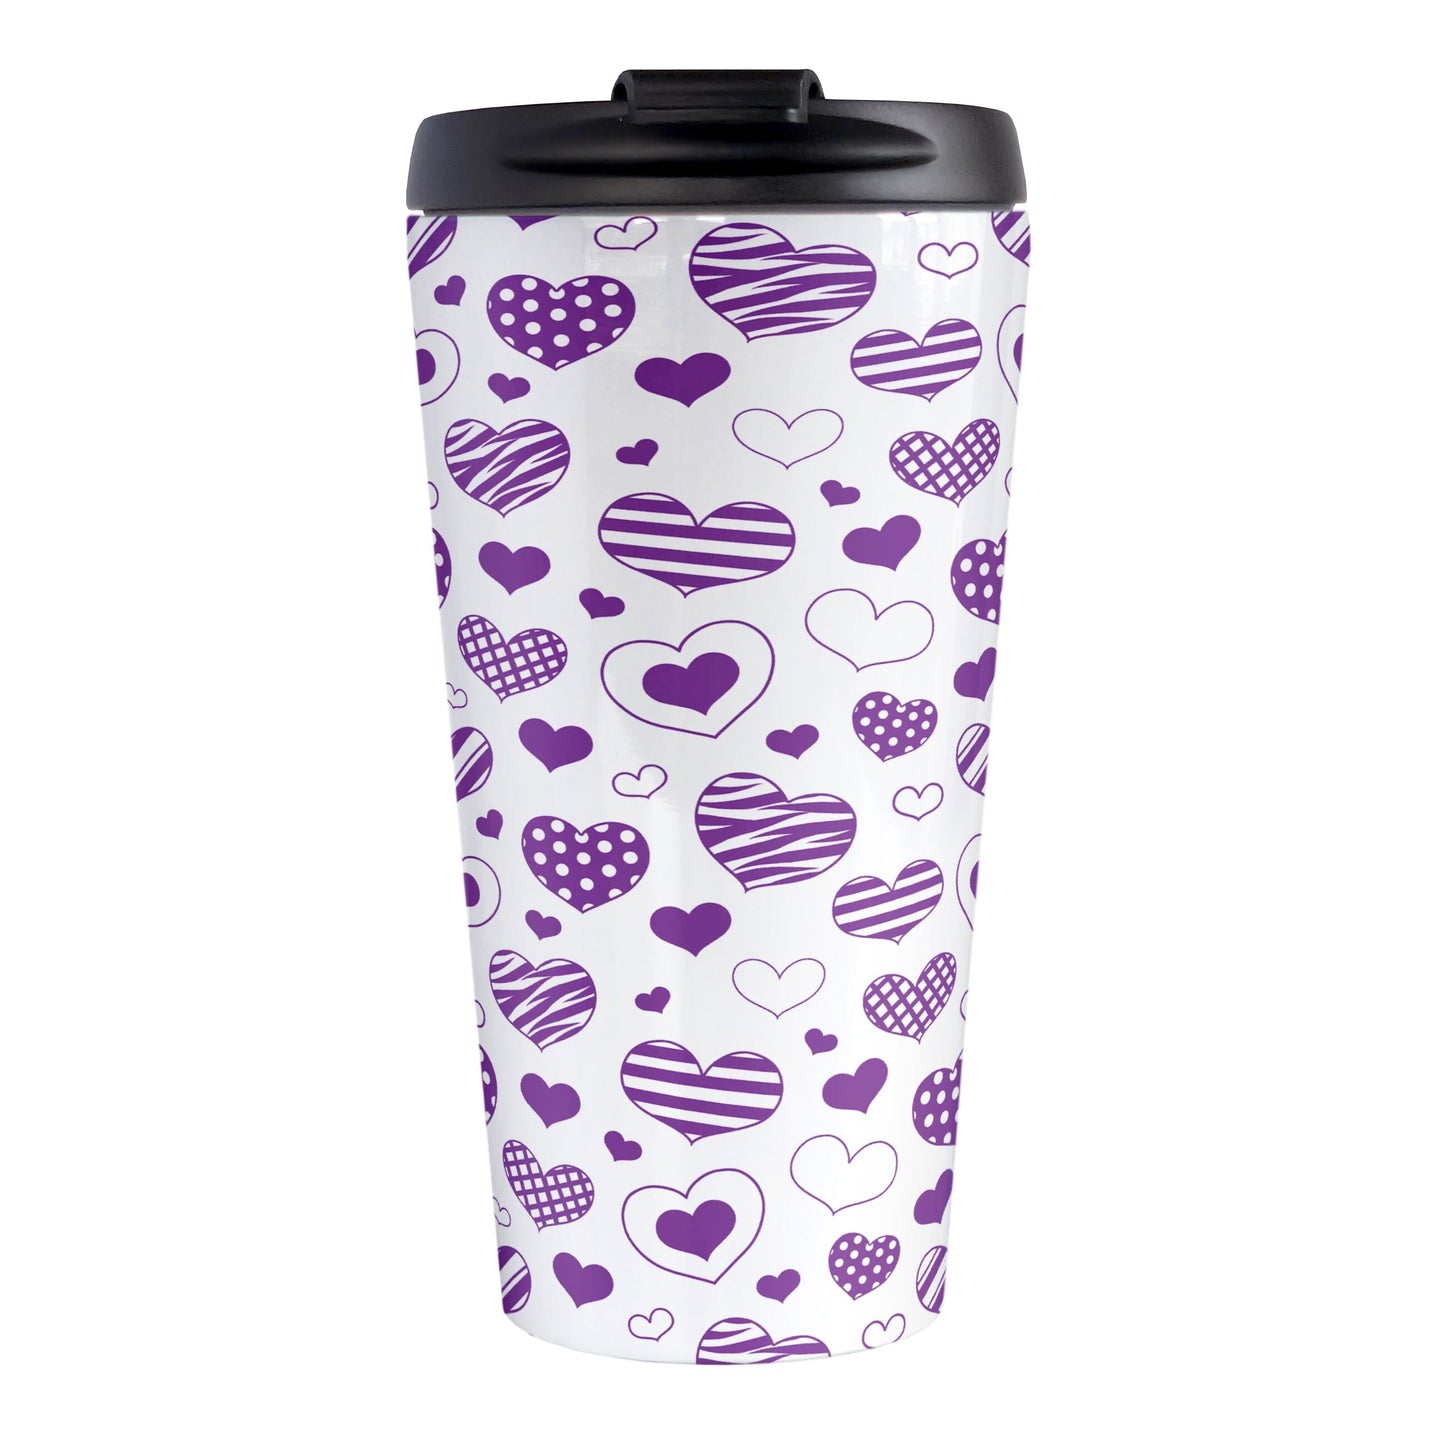 Purple Heart Doodles Travel Mug (15oz) at Amy's Coffee Mugs. A stainless steel travel mug designed with hand-drawn purple heart doodles in a pattern that wraps around the travel mug. This cute heart pattern is perfect for Valentine's Day or for anyone who loves hearts and young-at-heart drawings. 